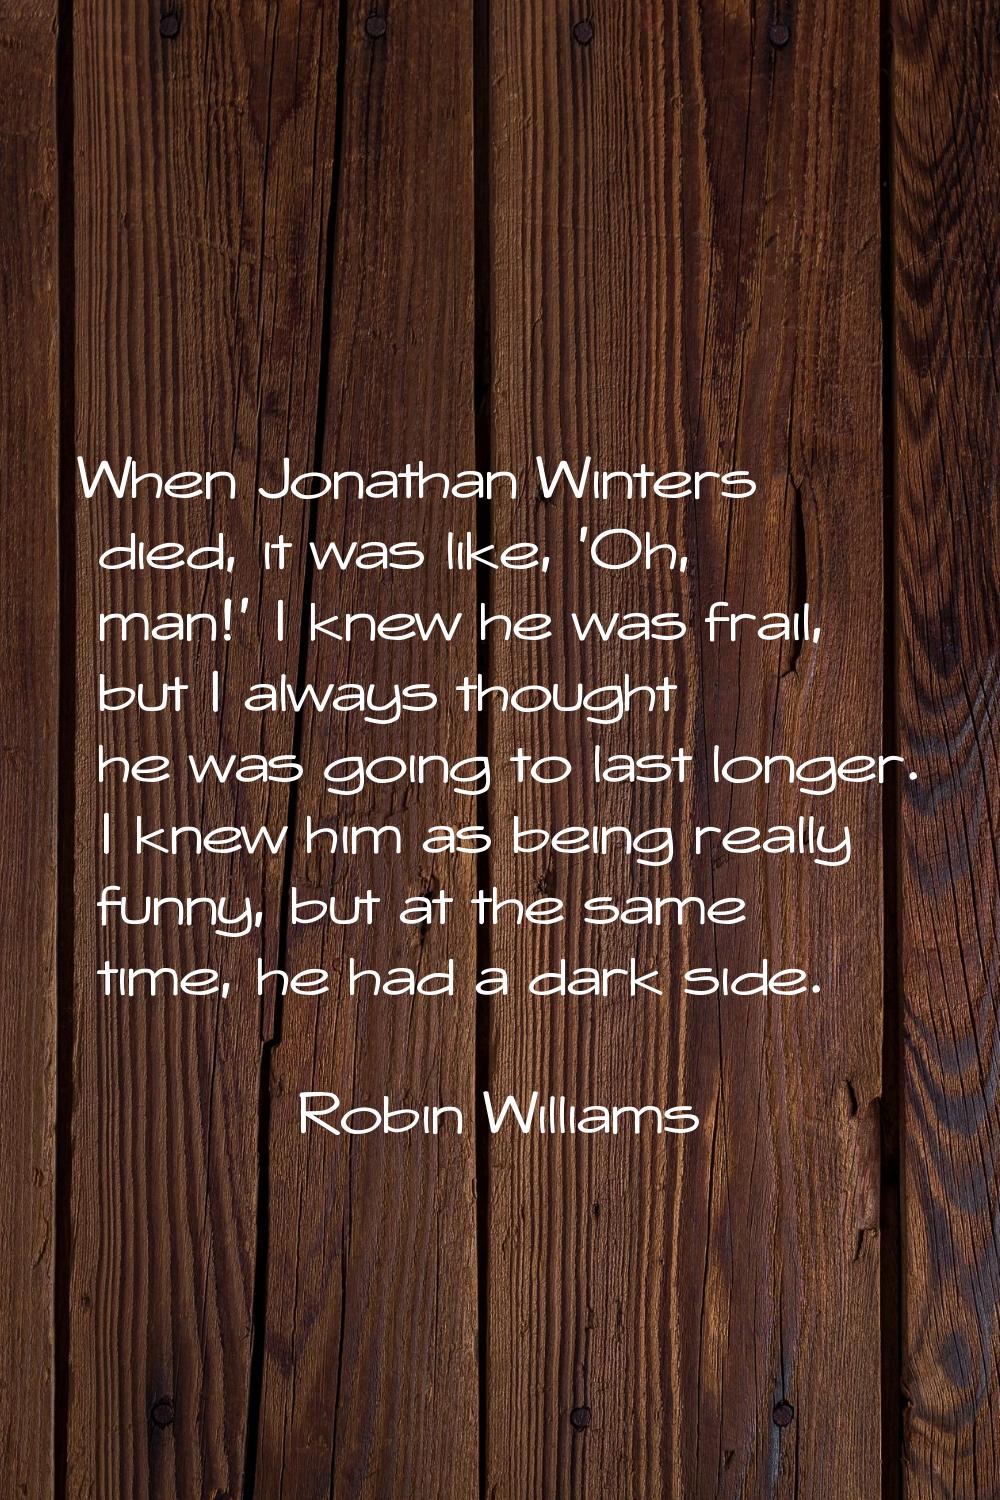 When Jonathan Winters died, it was like, 'Oh, man!' I knew he was frail, but I always thought he wa